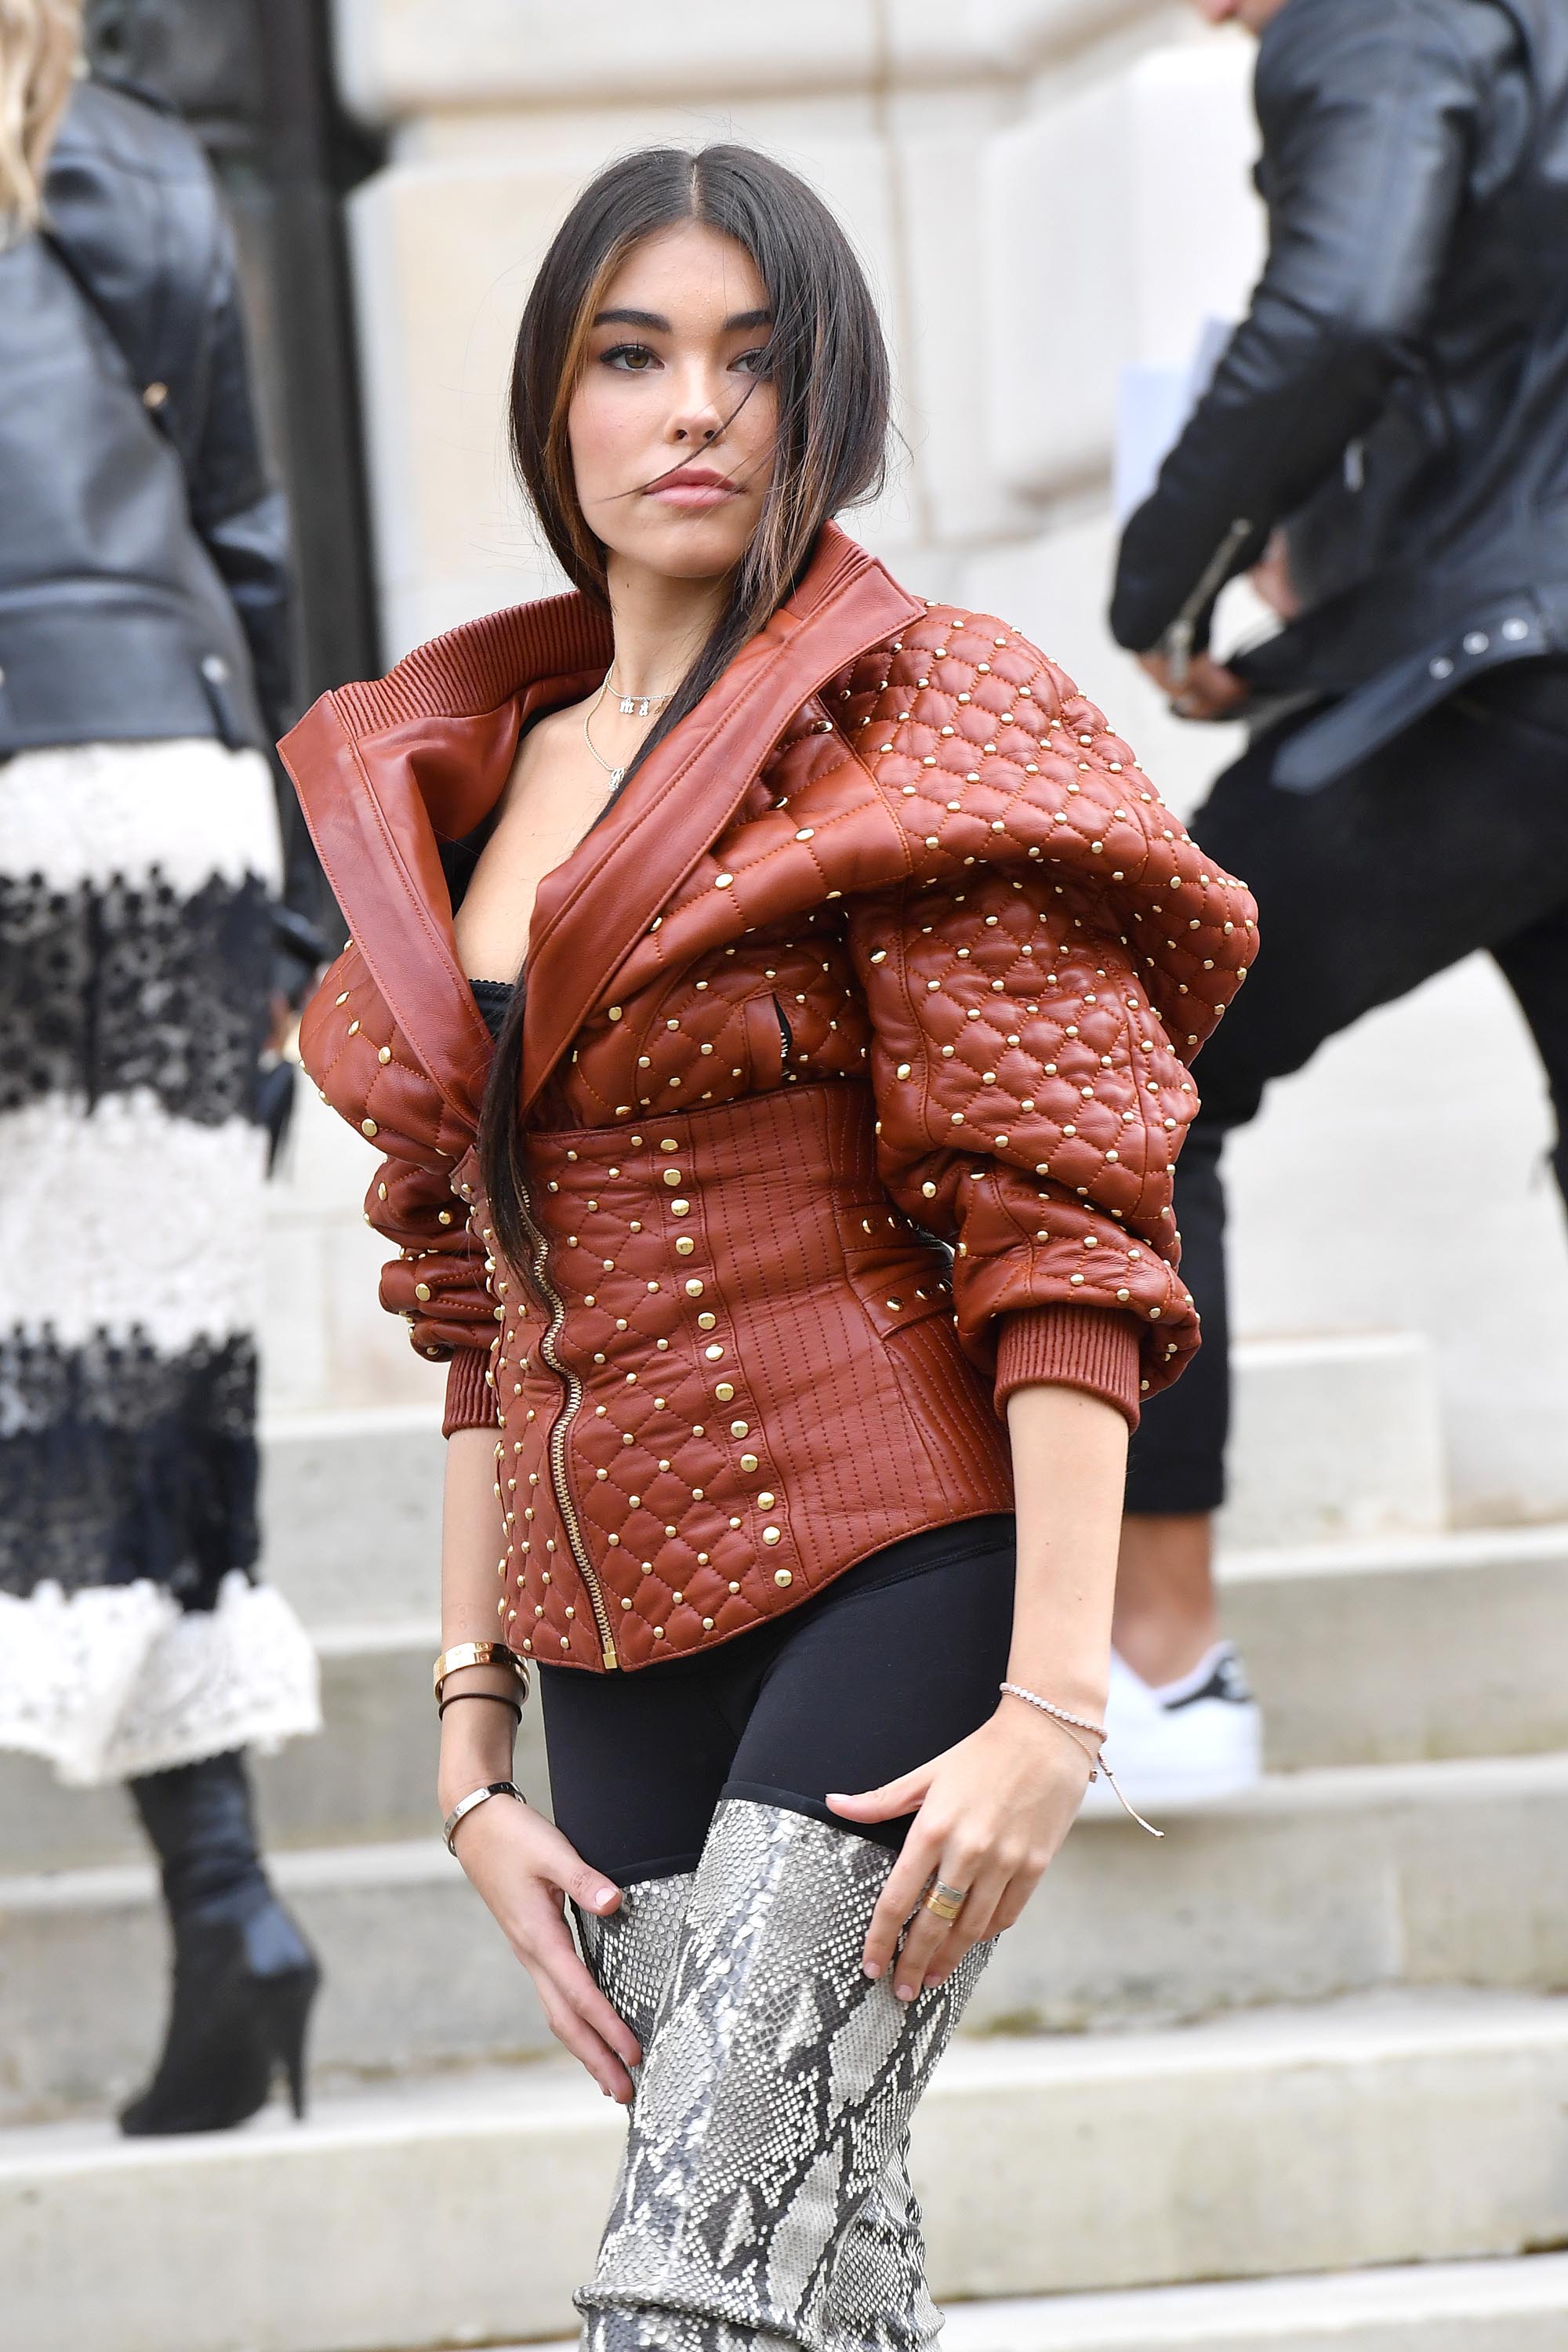 Madison Beer attends the Balmain show